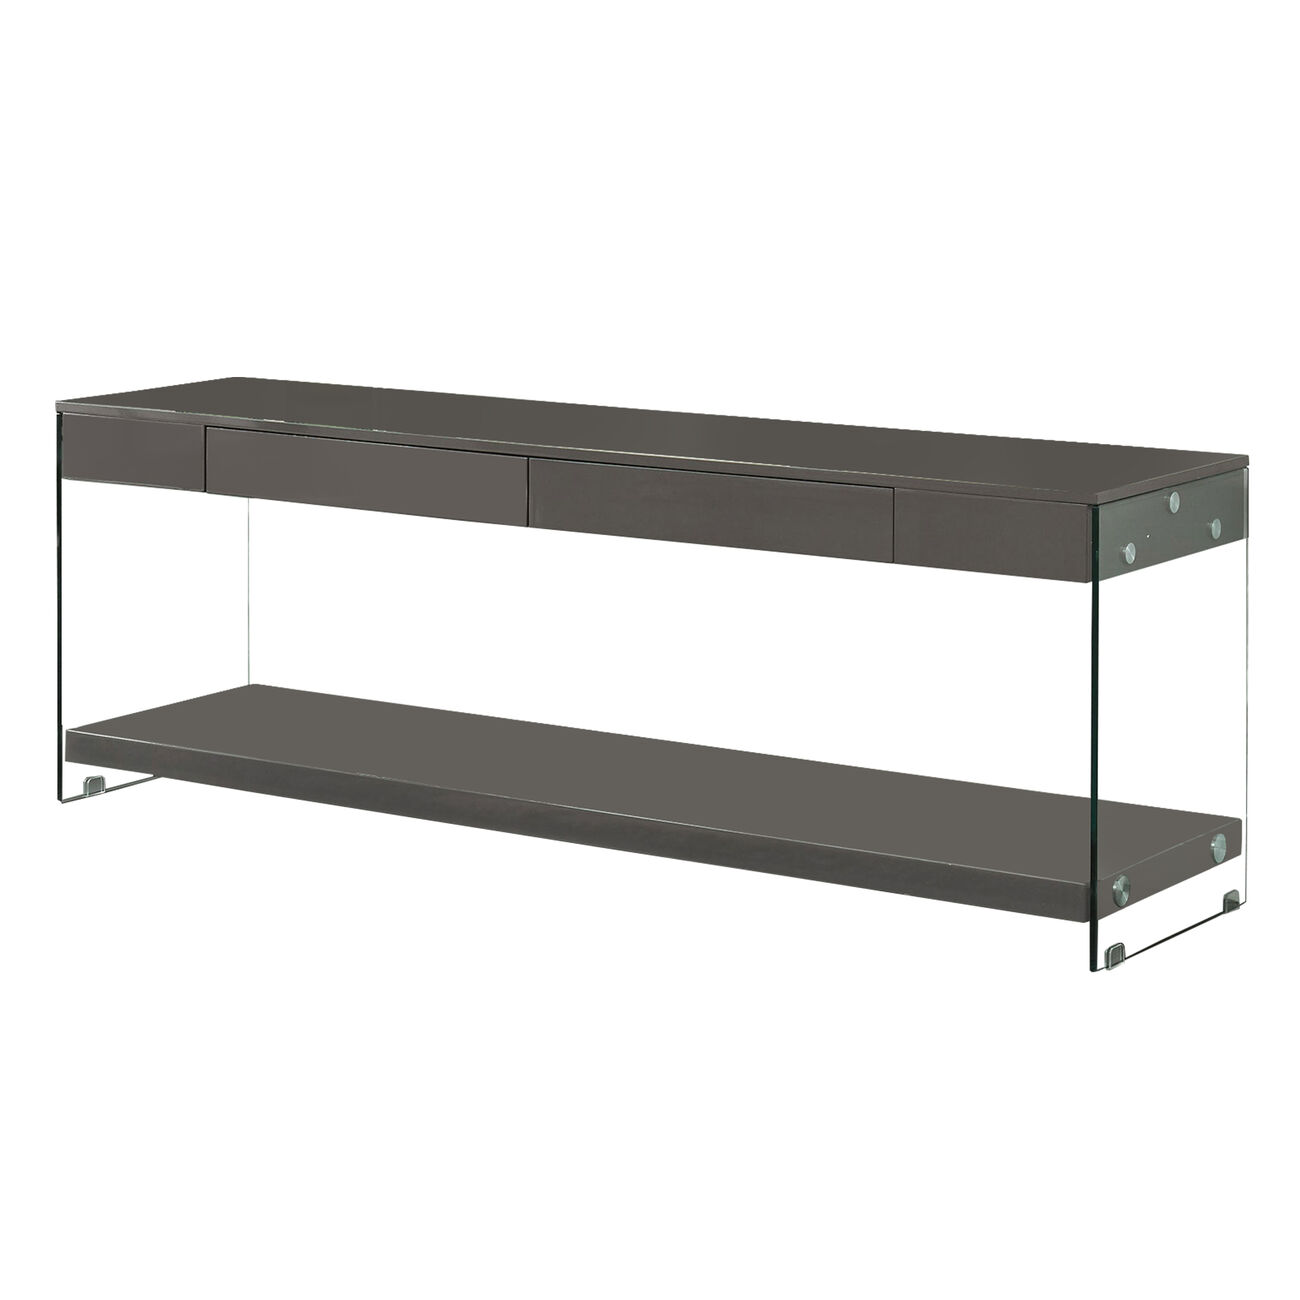 Contemporary Style Plastic TV Stand with Glass Side Panels, Gray